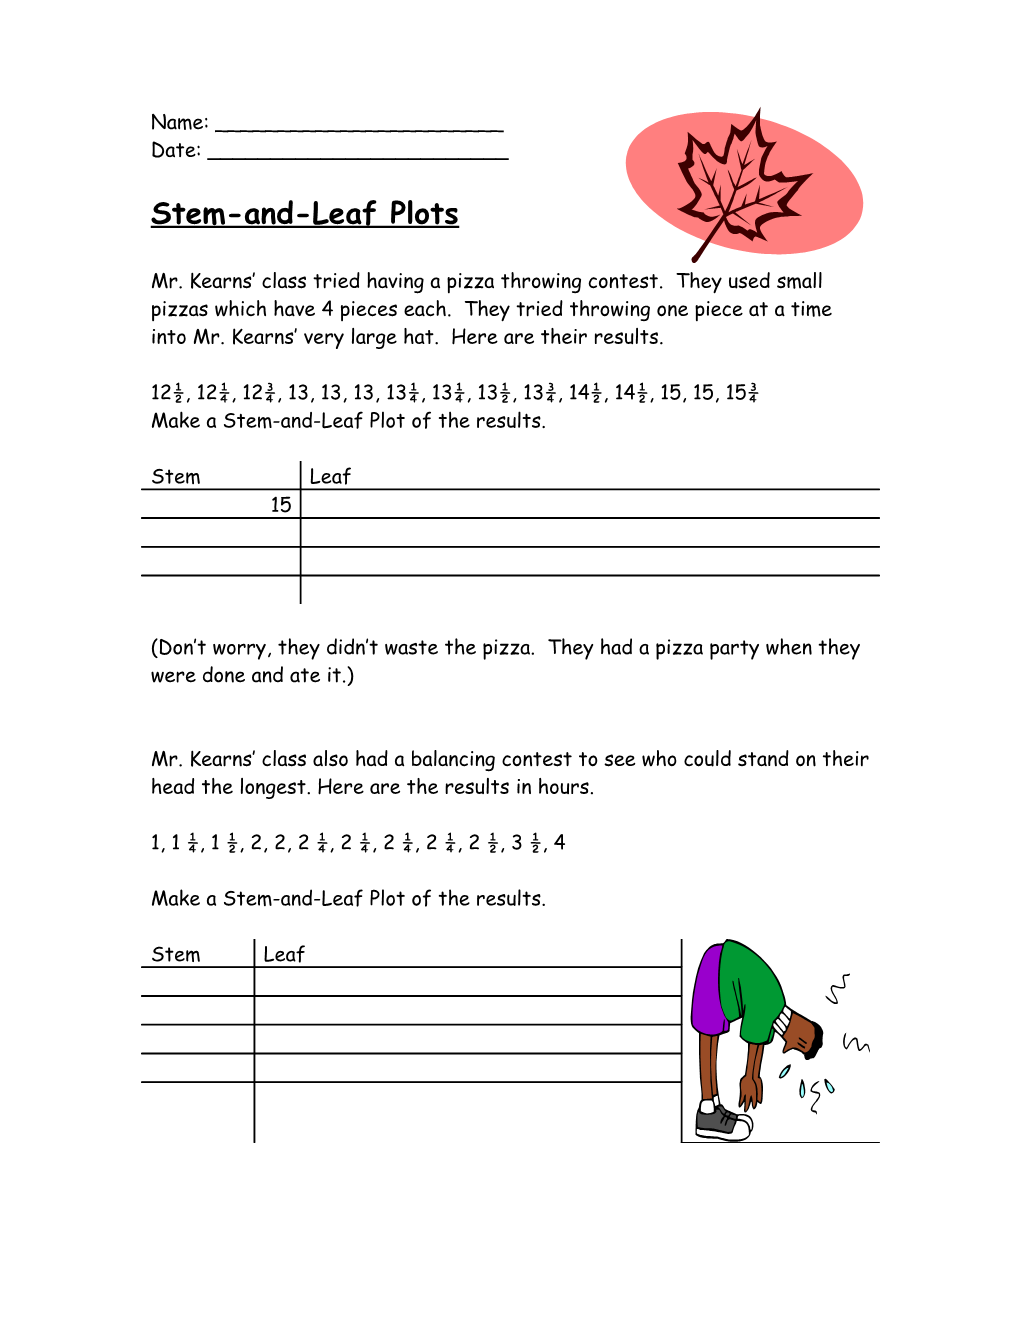 Make a Stem-And-Leaf Plot of the Results